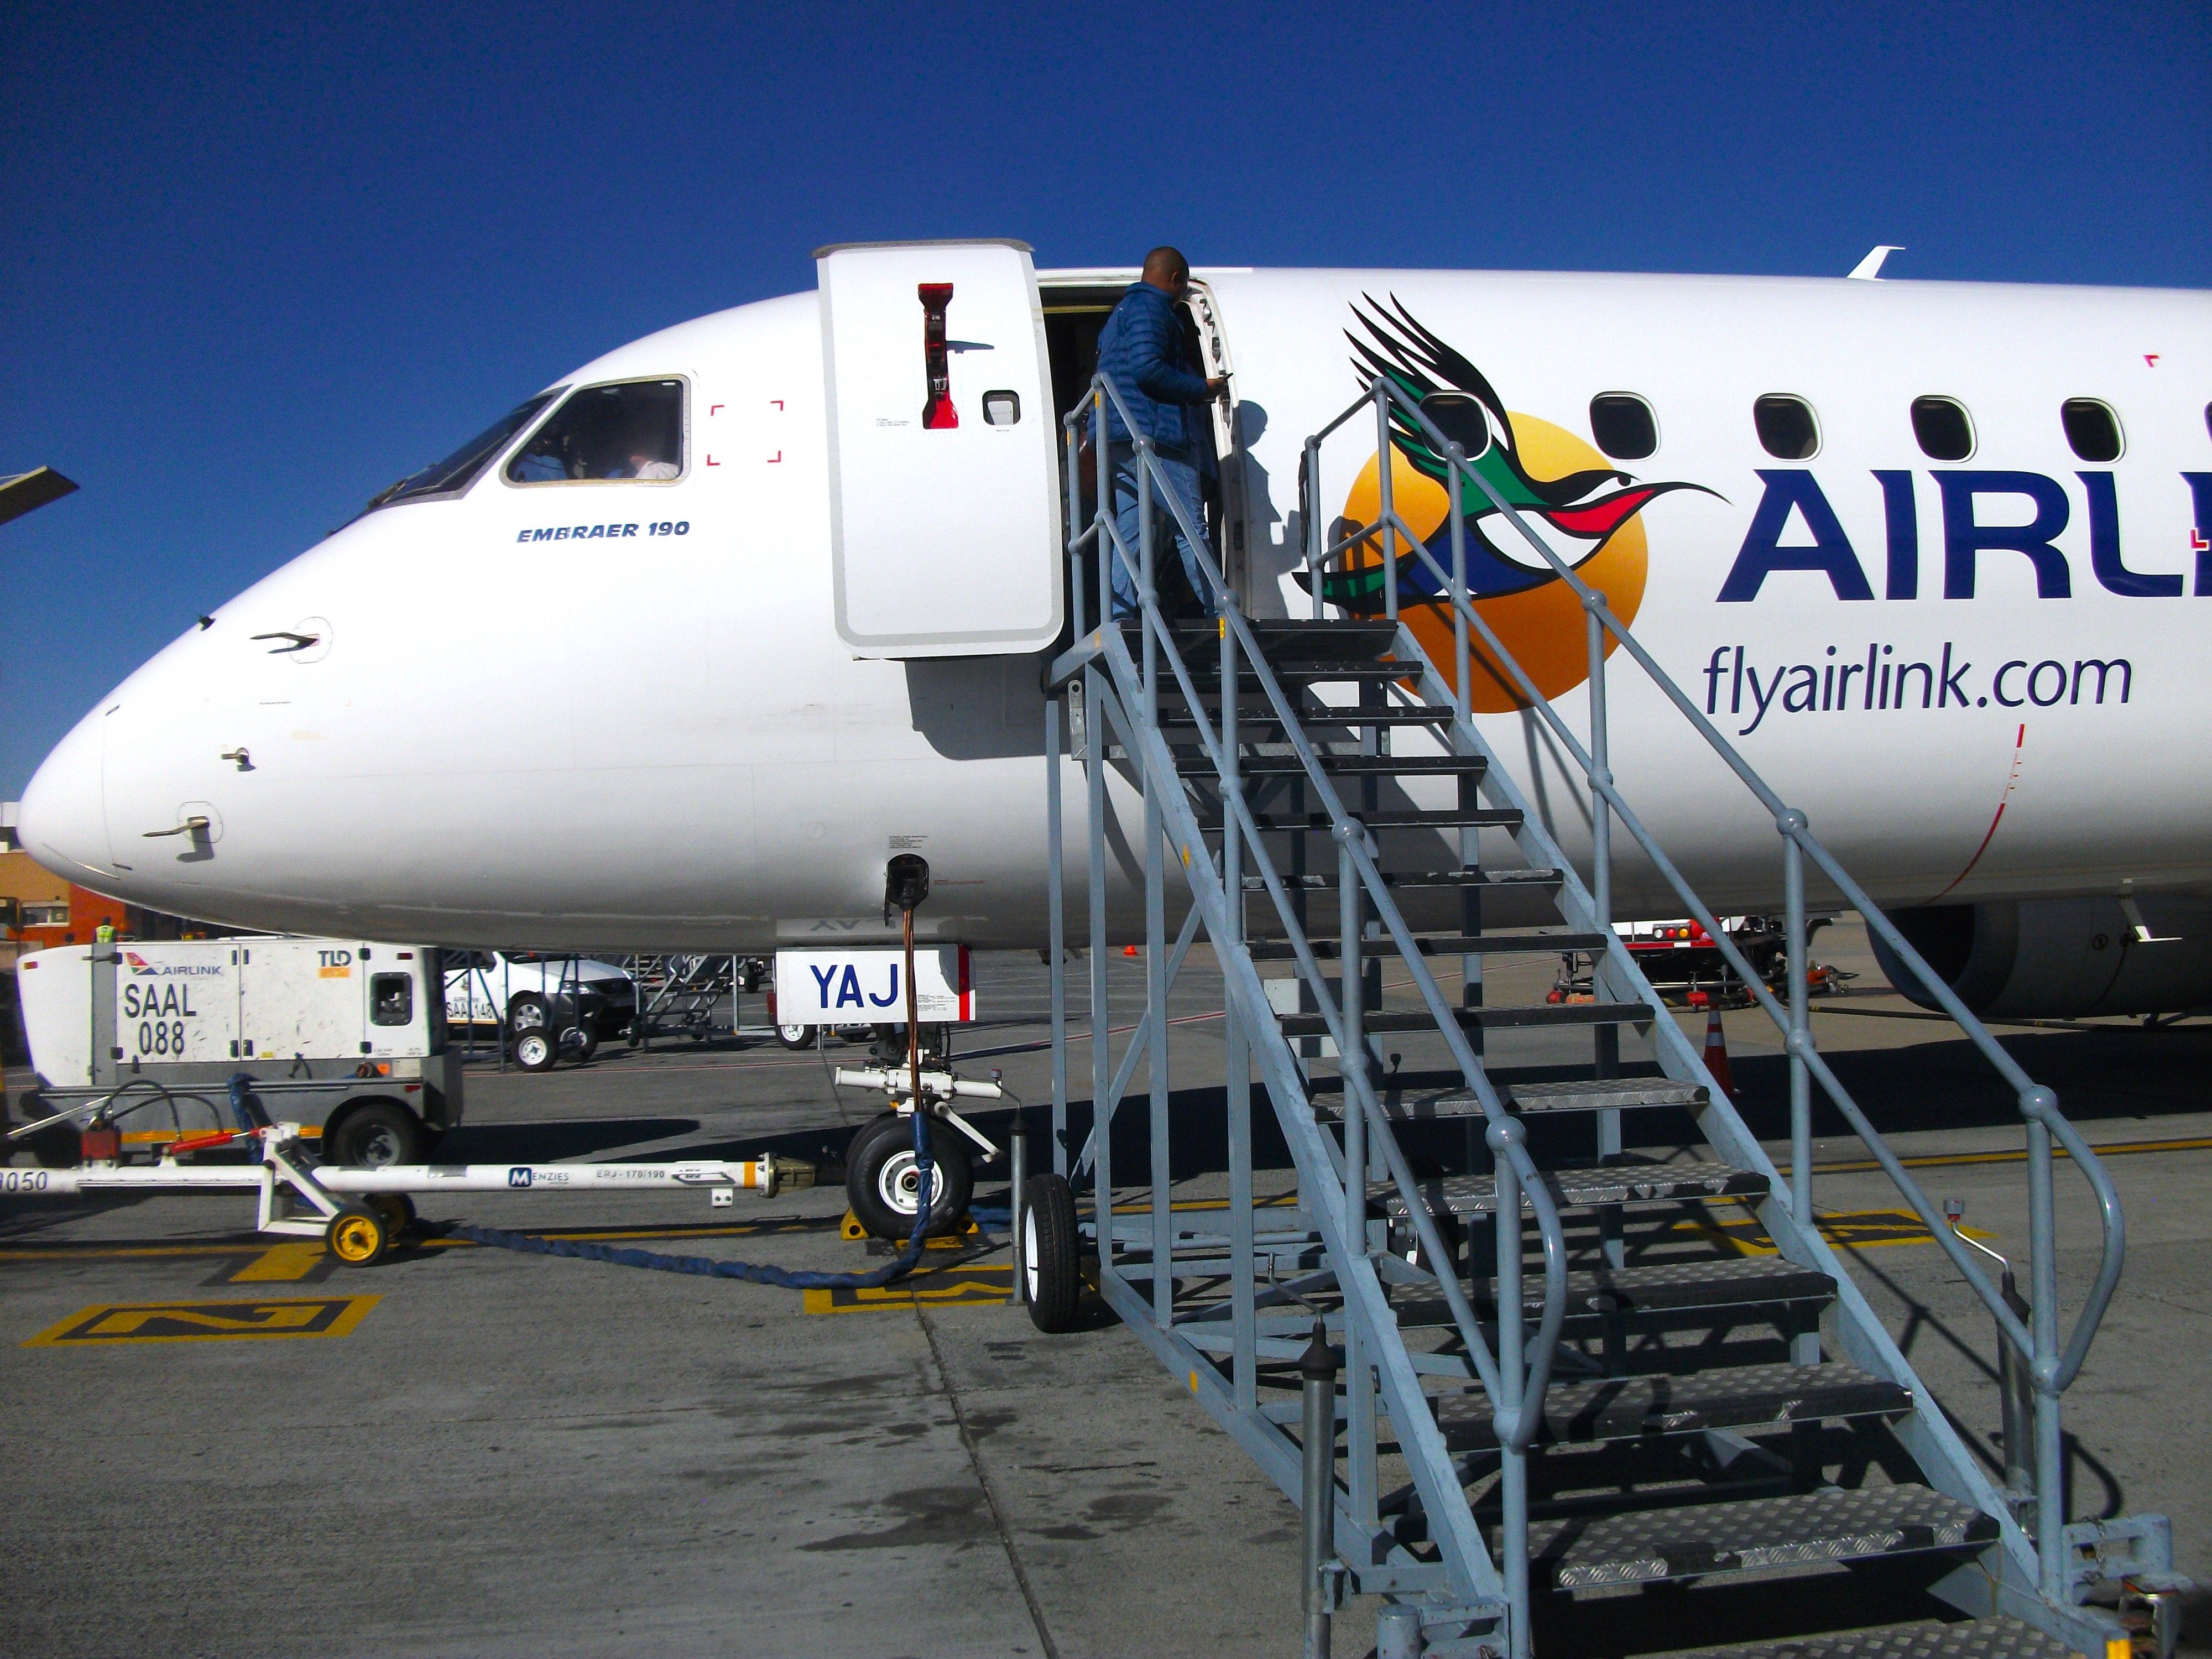 A closeup of an Airlink Embraer 190 on an airport apron.